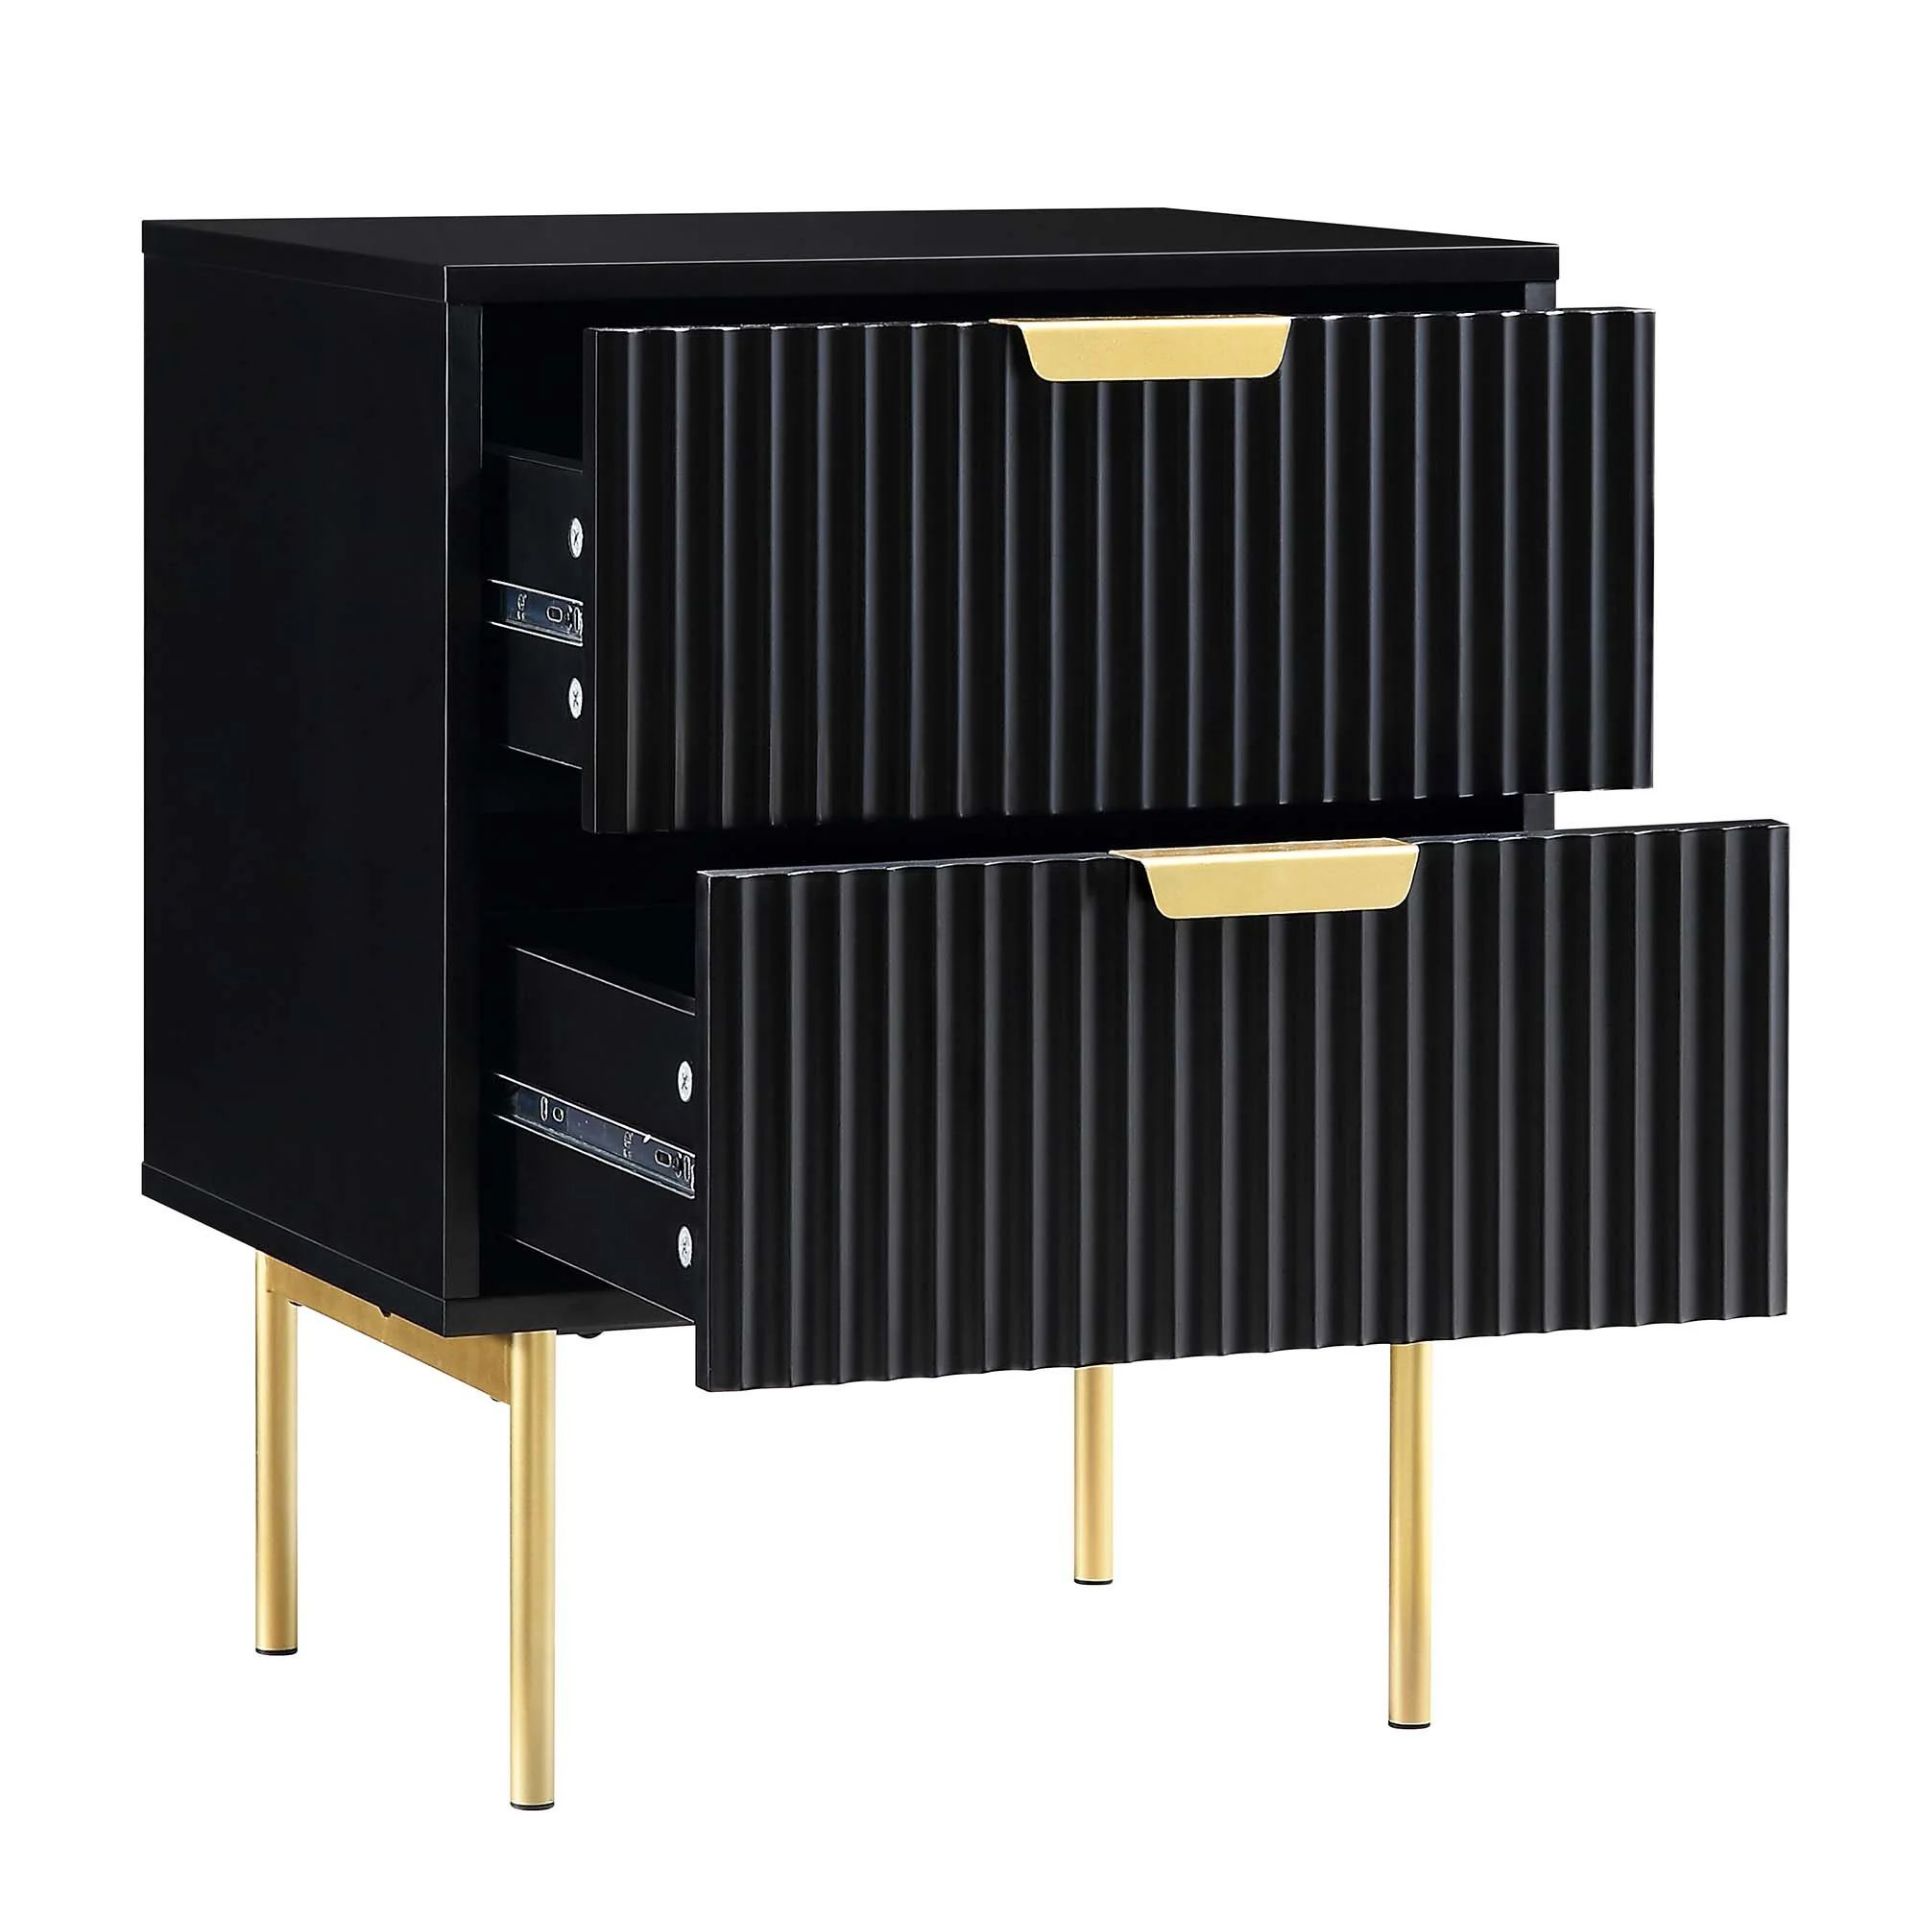 Richmond Ridged 2 Drawer Bedside Table, Matte Black. - R13.7. RRP £179.99. Our Richmond bedside - Image 4 of 4